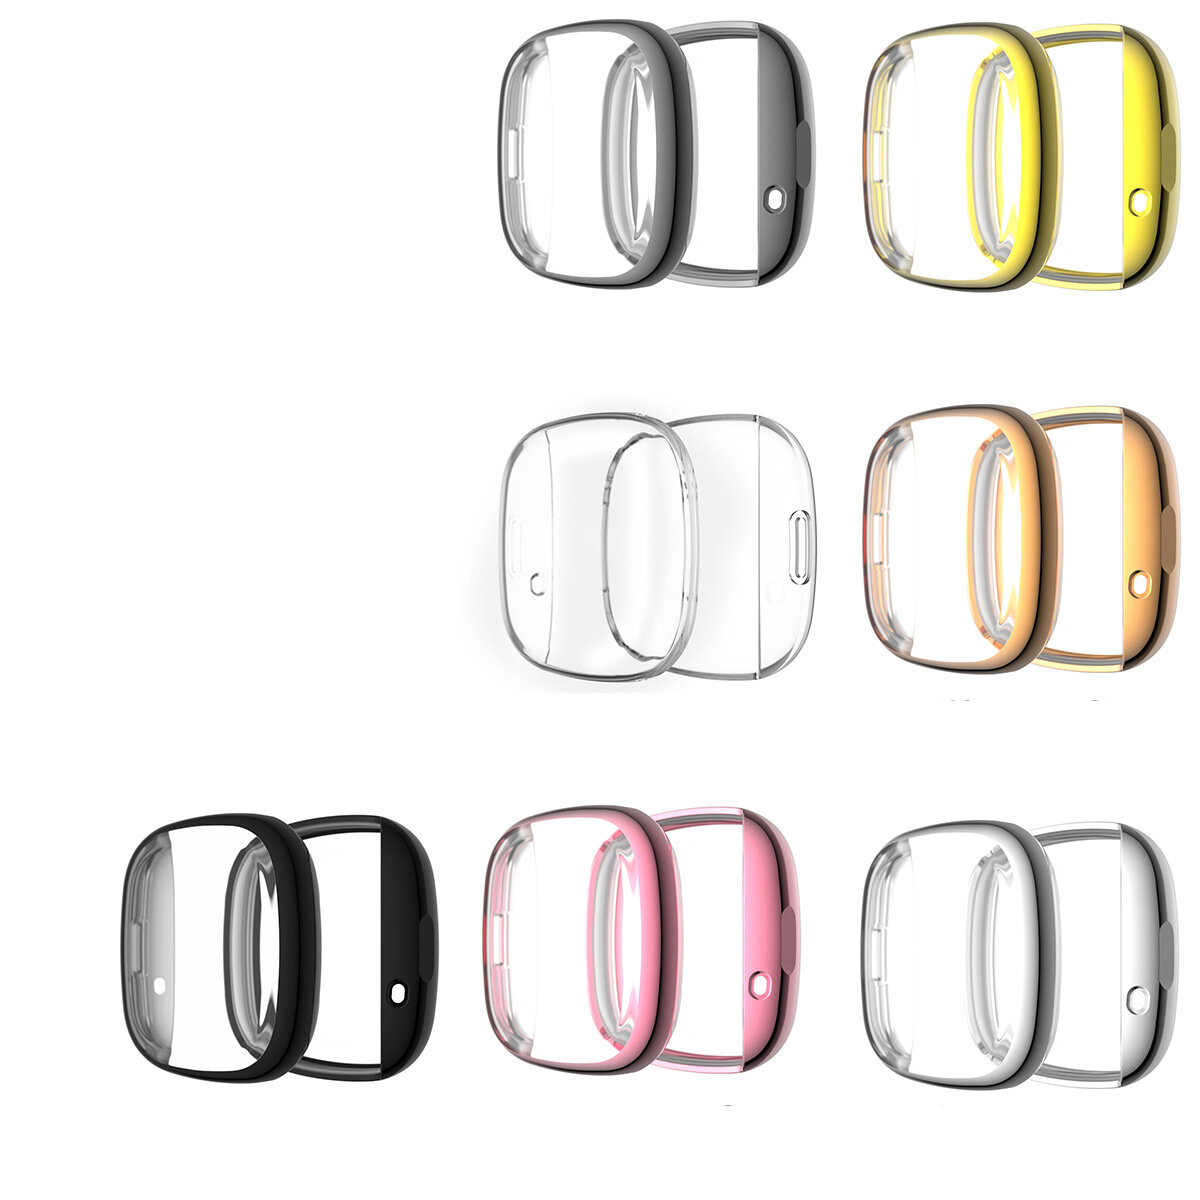 

Bakeey TPU Full Cover Watch Protector Case Cover for Fitbit Versa 3 Sense Smart Watch